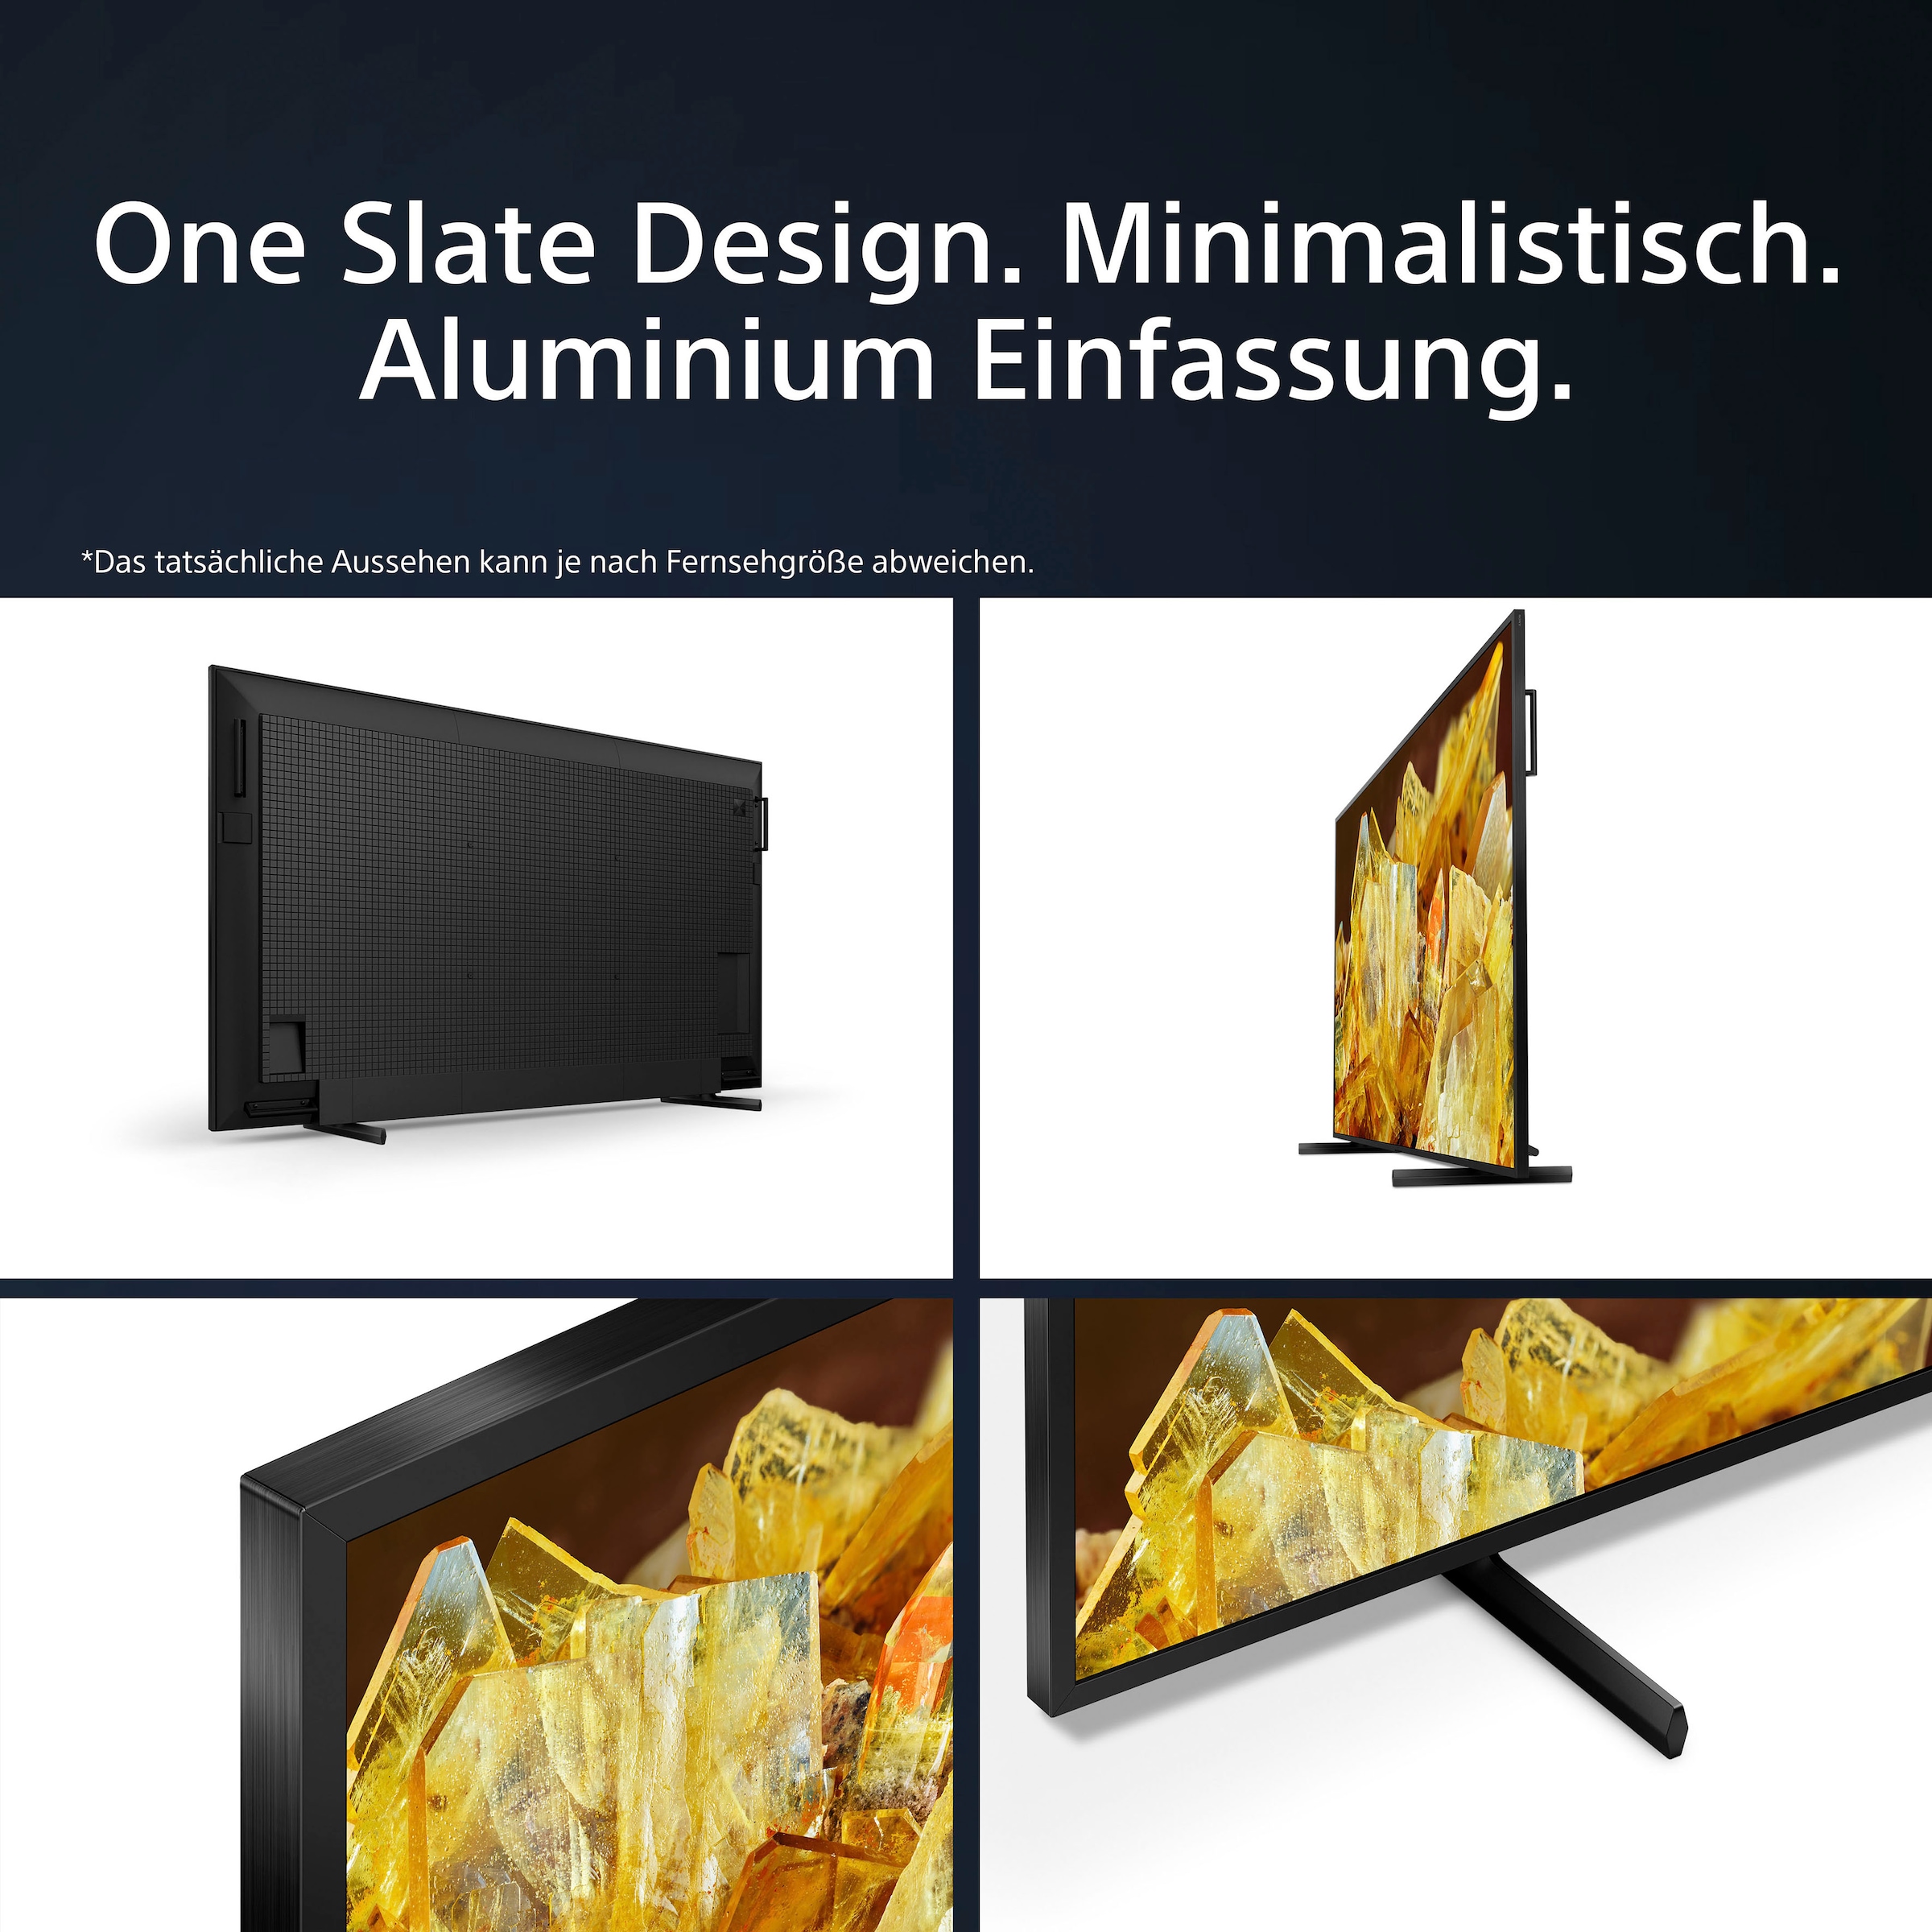 Sony LCD-LED Fernseher »XR-75X90L«, 189 cm/75 Zoll, 4K Ultra HD, Google TV, TRILUMINOS PRO, BRAVIA CORE, mit exklusiven PS5-Features